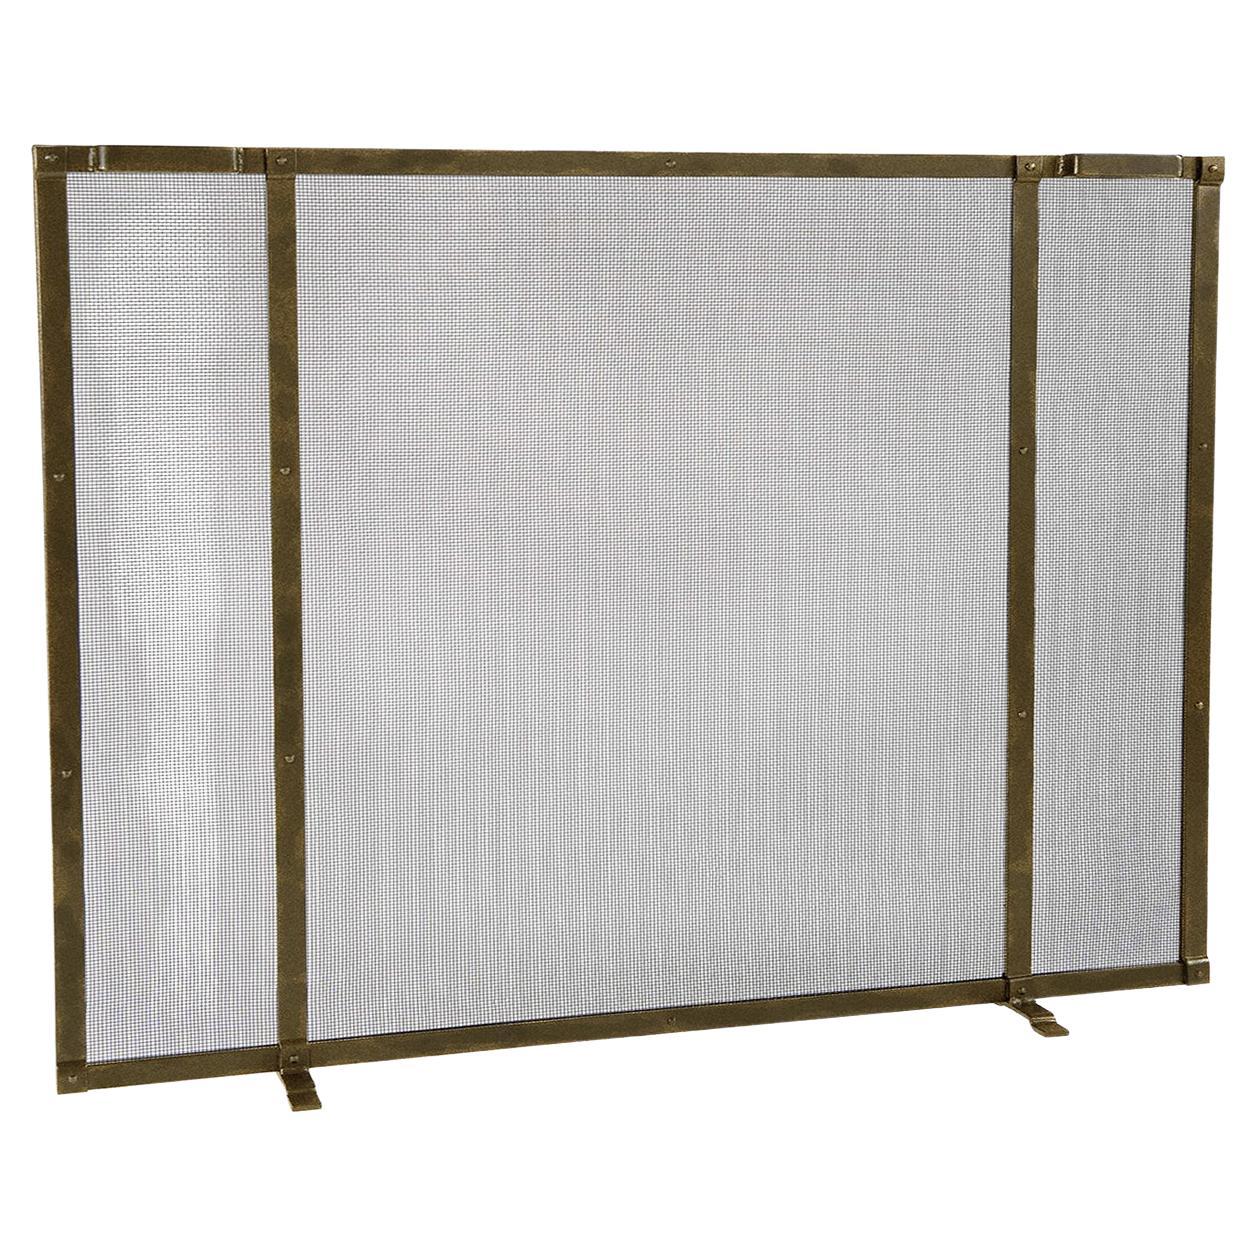 Gunnison Fireplace Screen in a Tobacco Finish For Sale